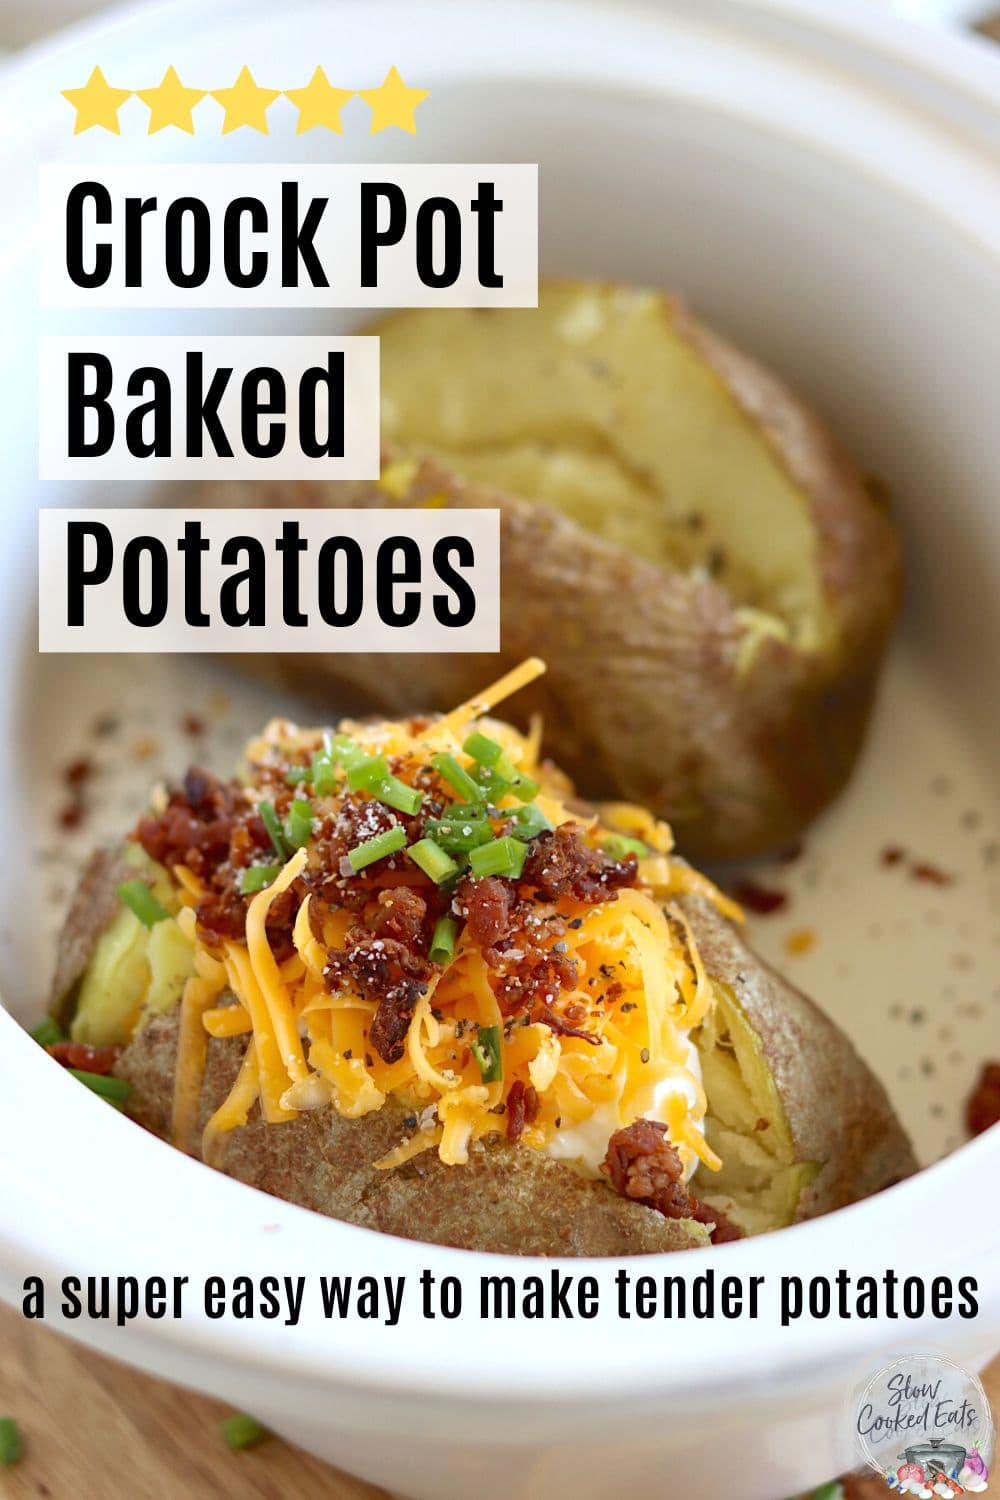 Easy Slow Cooker Baked Potatoes Without Foil | Slow Cooked Eats